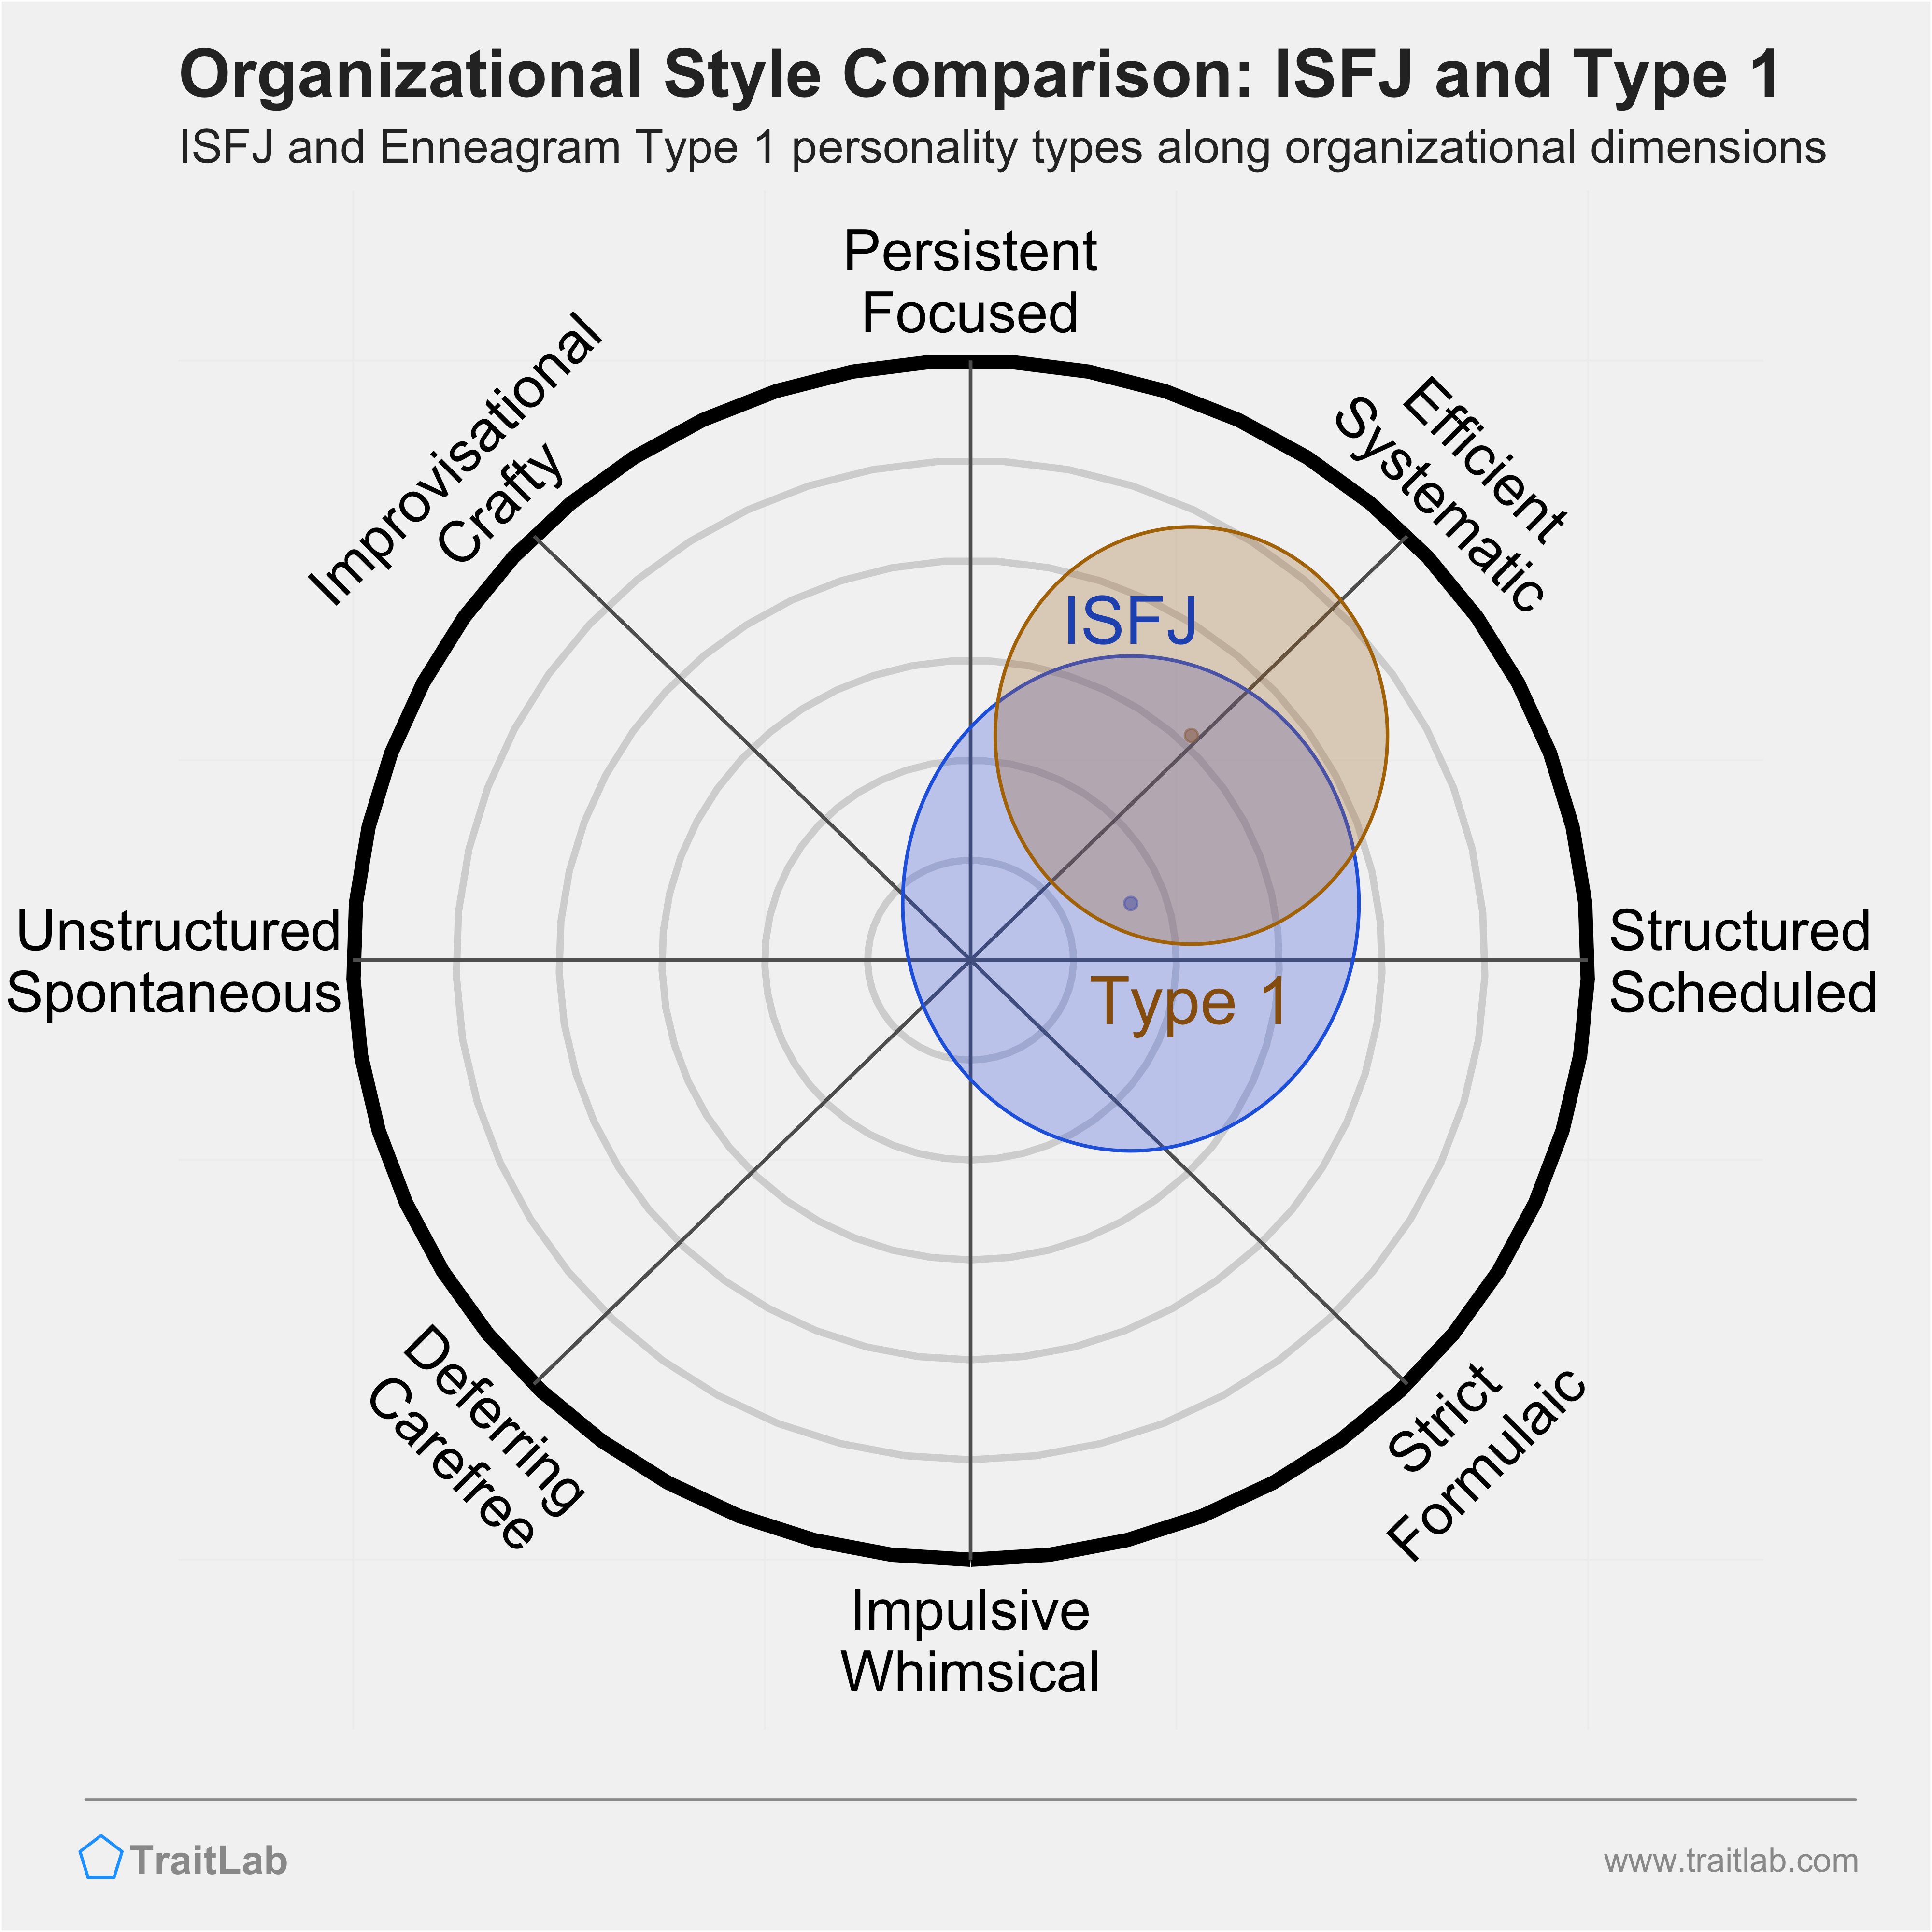 ISFJ and Type 1 comparison across organizational dimensions